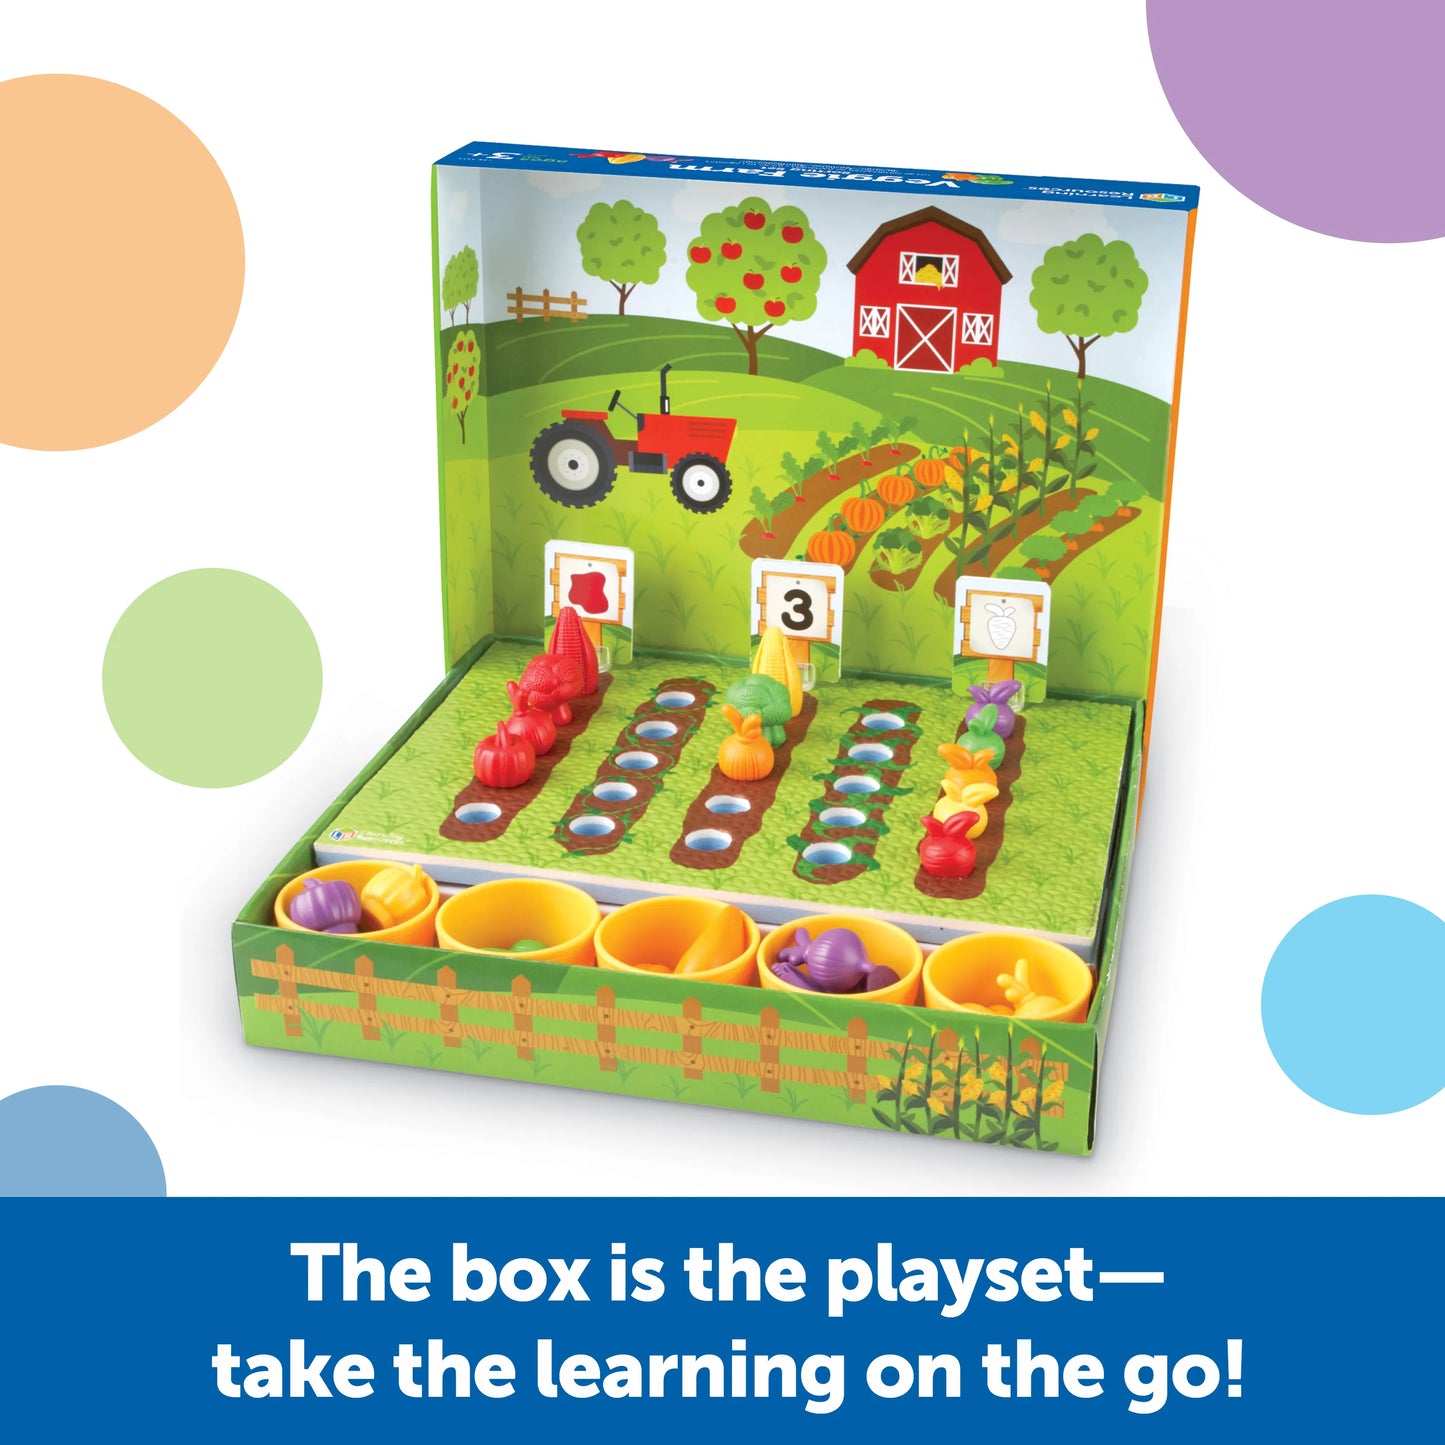 Learning Resources Veggie Farm Sorting Set 蔬菜農場分類套裝